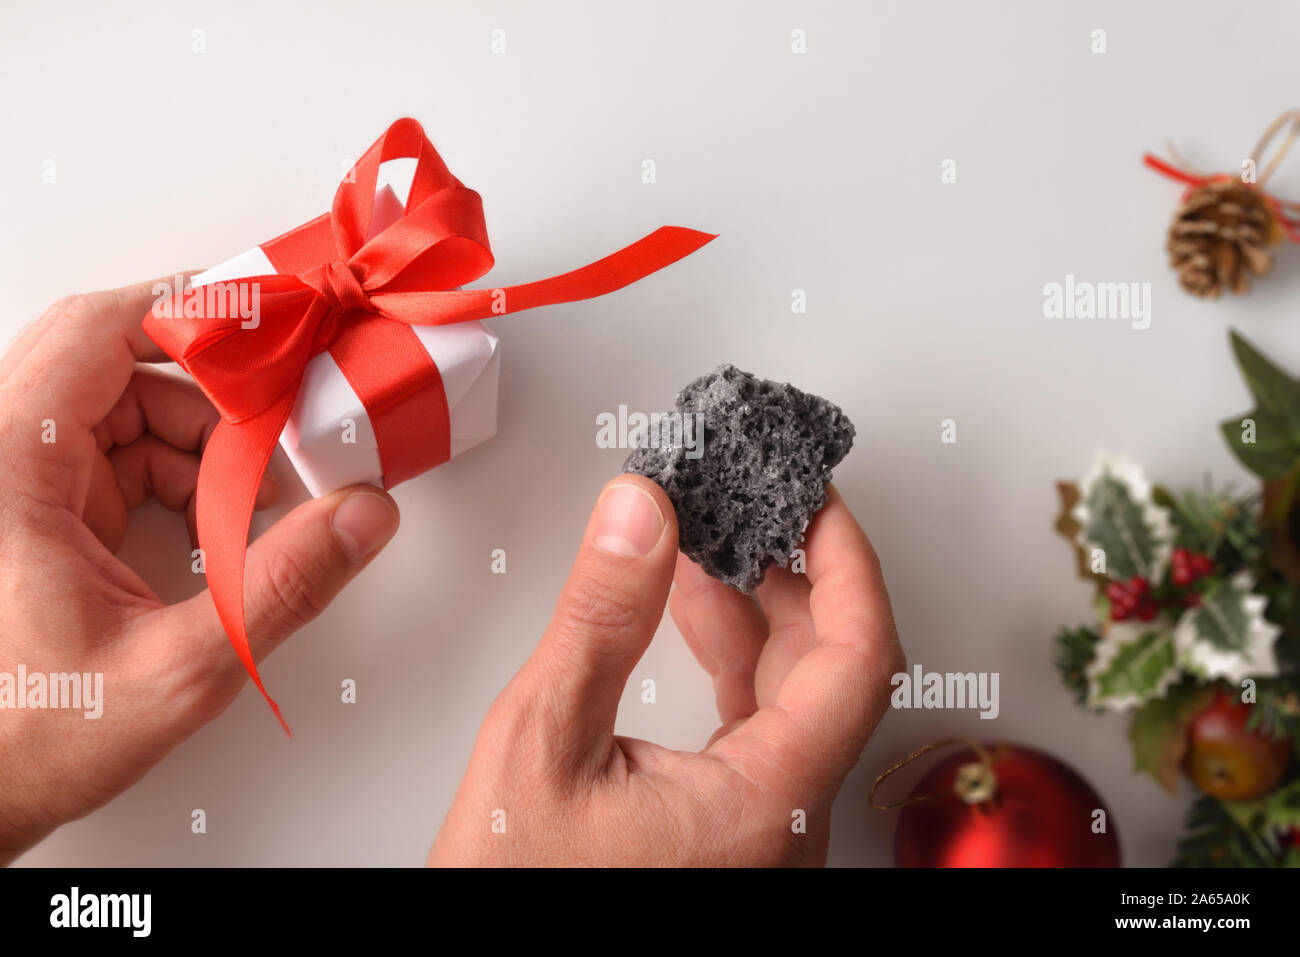 Hands with gift and coal on Christmas day. Reward concept for good or bad behavior. Horizontal composition. Top view. Stock Photo